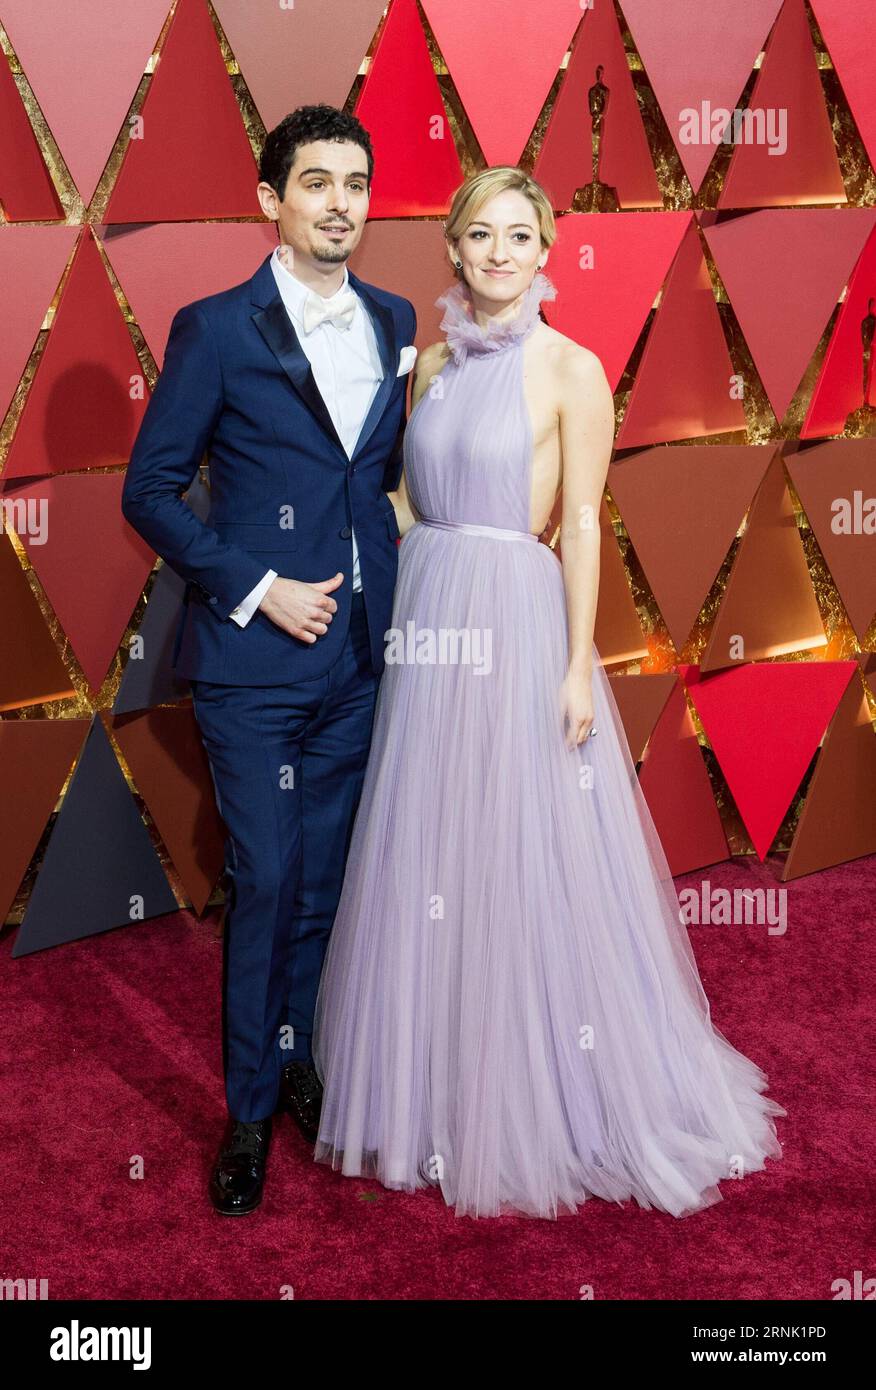 (170227) -- LOS ANGELES, Feb. 26, 2017 -- Director Damien Chazelle(L) and actress Olivia Hamilton arrive for the red carpet of the 89th Academy Awards at the Dolby Theater in Los Angeles, the United States, on Feb. 26, 2017. )(gj) U.S.-LOS ANGELES-OSCAR-RED CARPET YangxLei PUBLICATIONxNOTxINxCHN   Los Angeles Feb 26 2017 Director Damien Chazelle l and actress Olivia Hamilton Arrive for The Red Carpet of The 89th Academy Awards AT The Dolby Theatre in Los Angeles The United States ON Feb 26 2017 GJ U S Los Angeles Oscar Red Carpet YangxLei PUBLICATIONxNOTxINxCHN Stock Photo